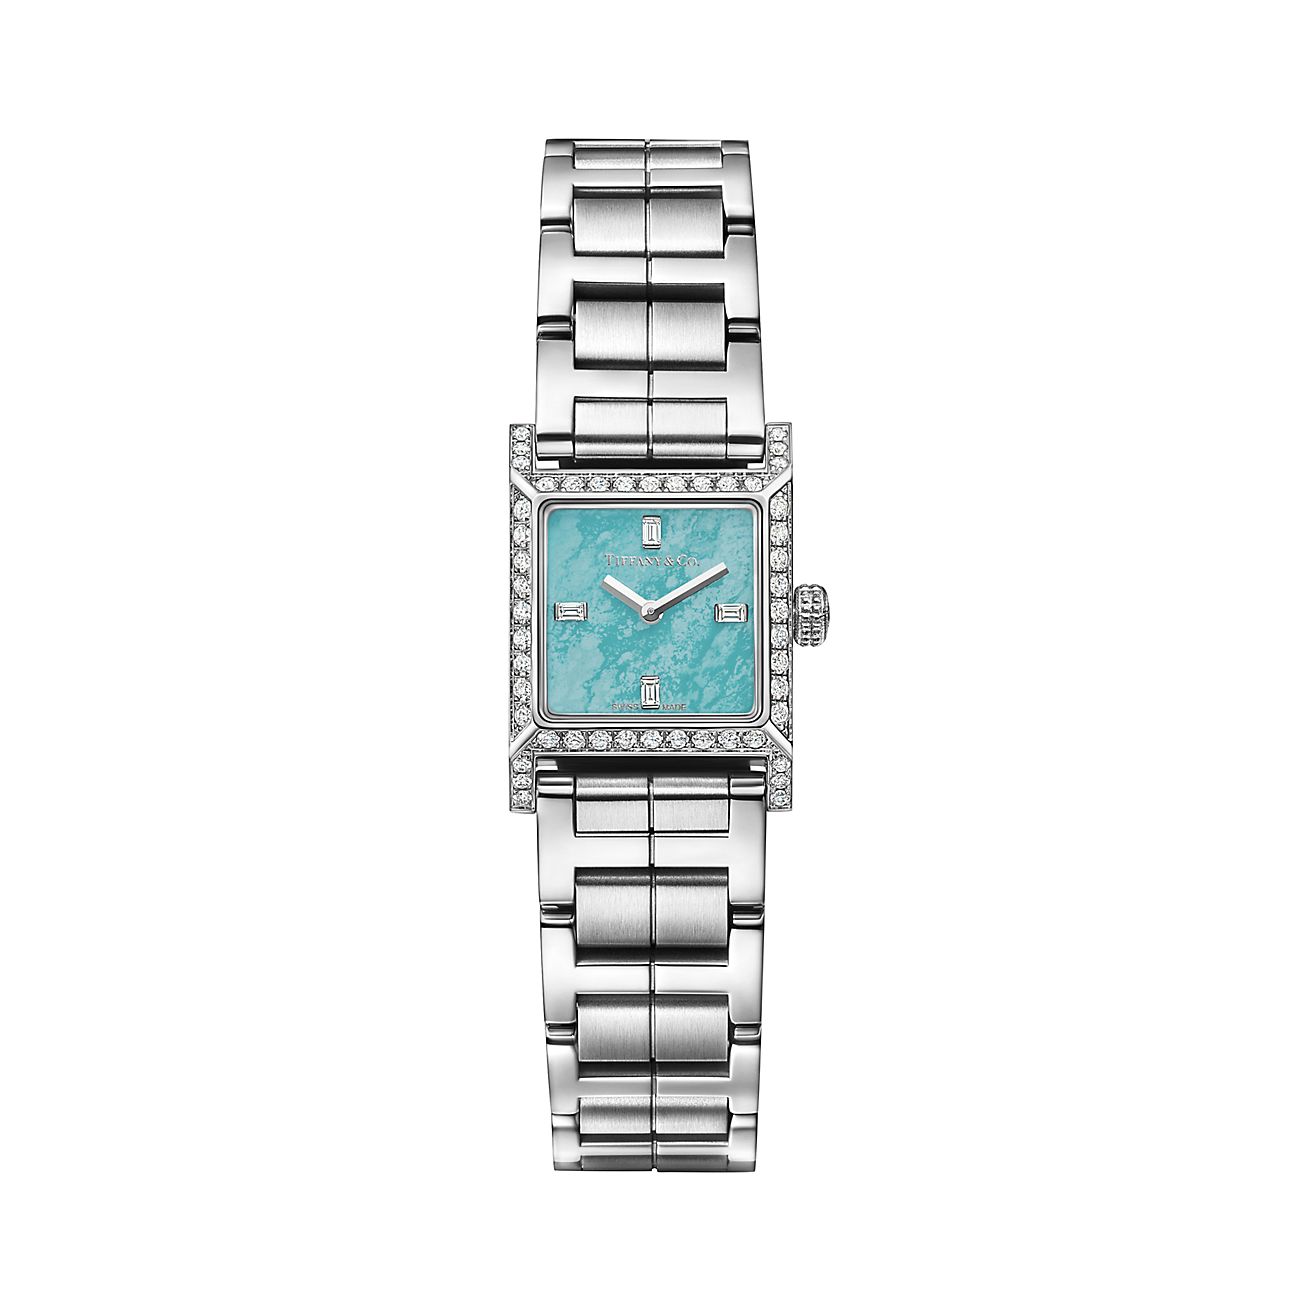 Tiffany 1837 Makers 16 mm Square Watch in Stainless Steel with a Turquoise  Dial